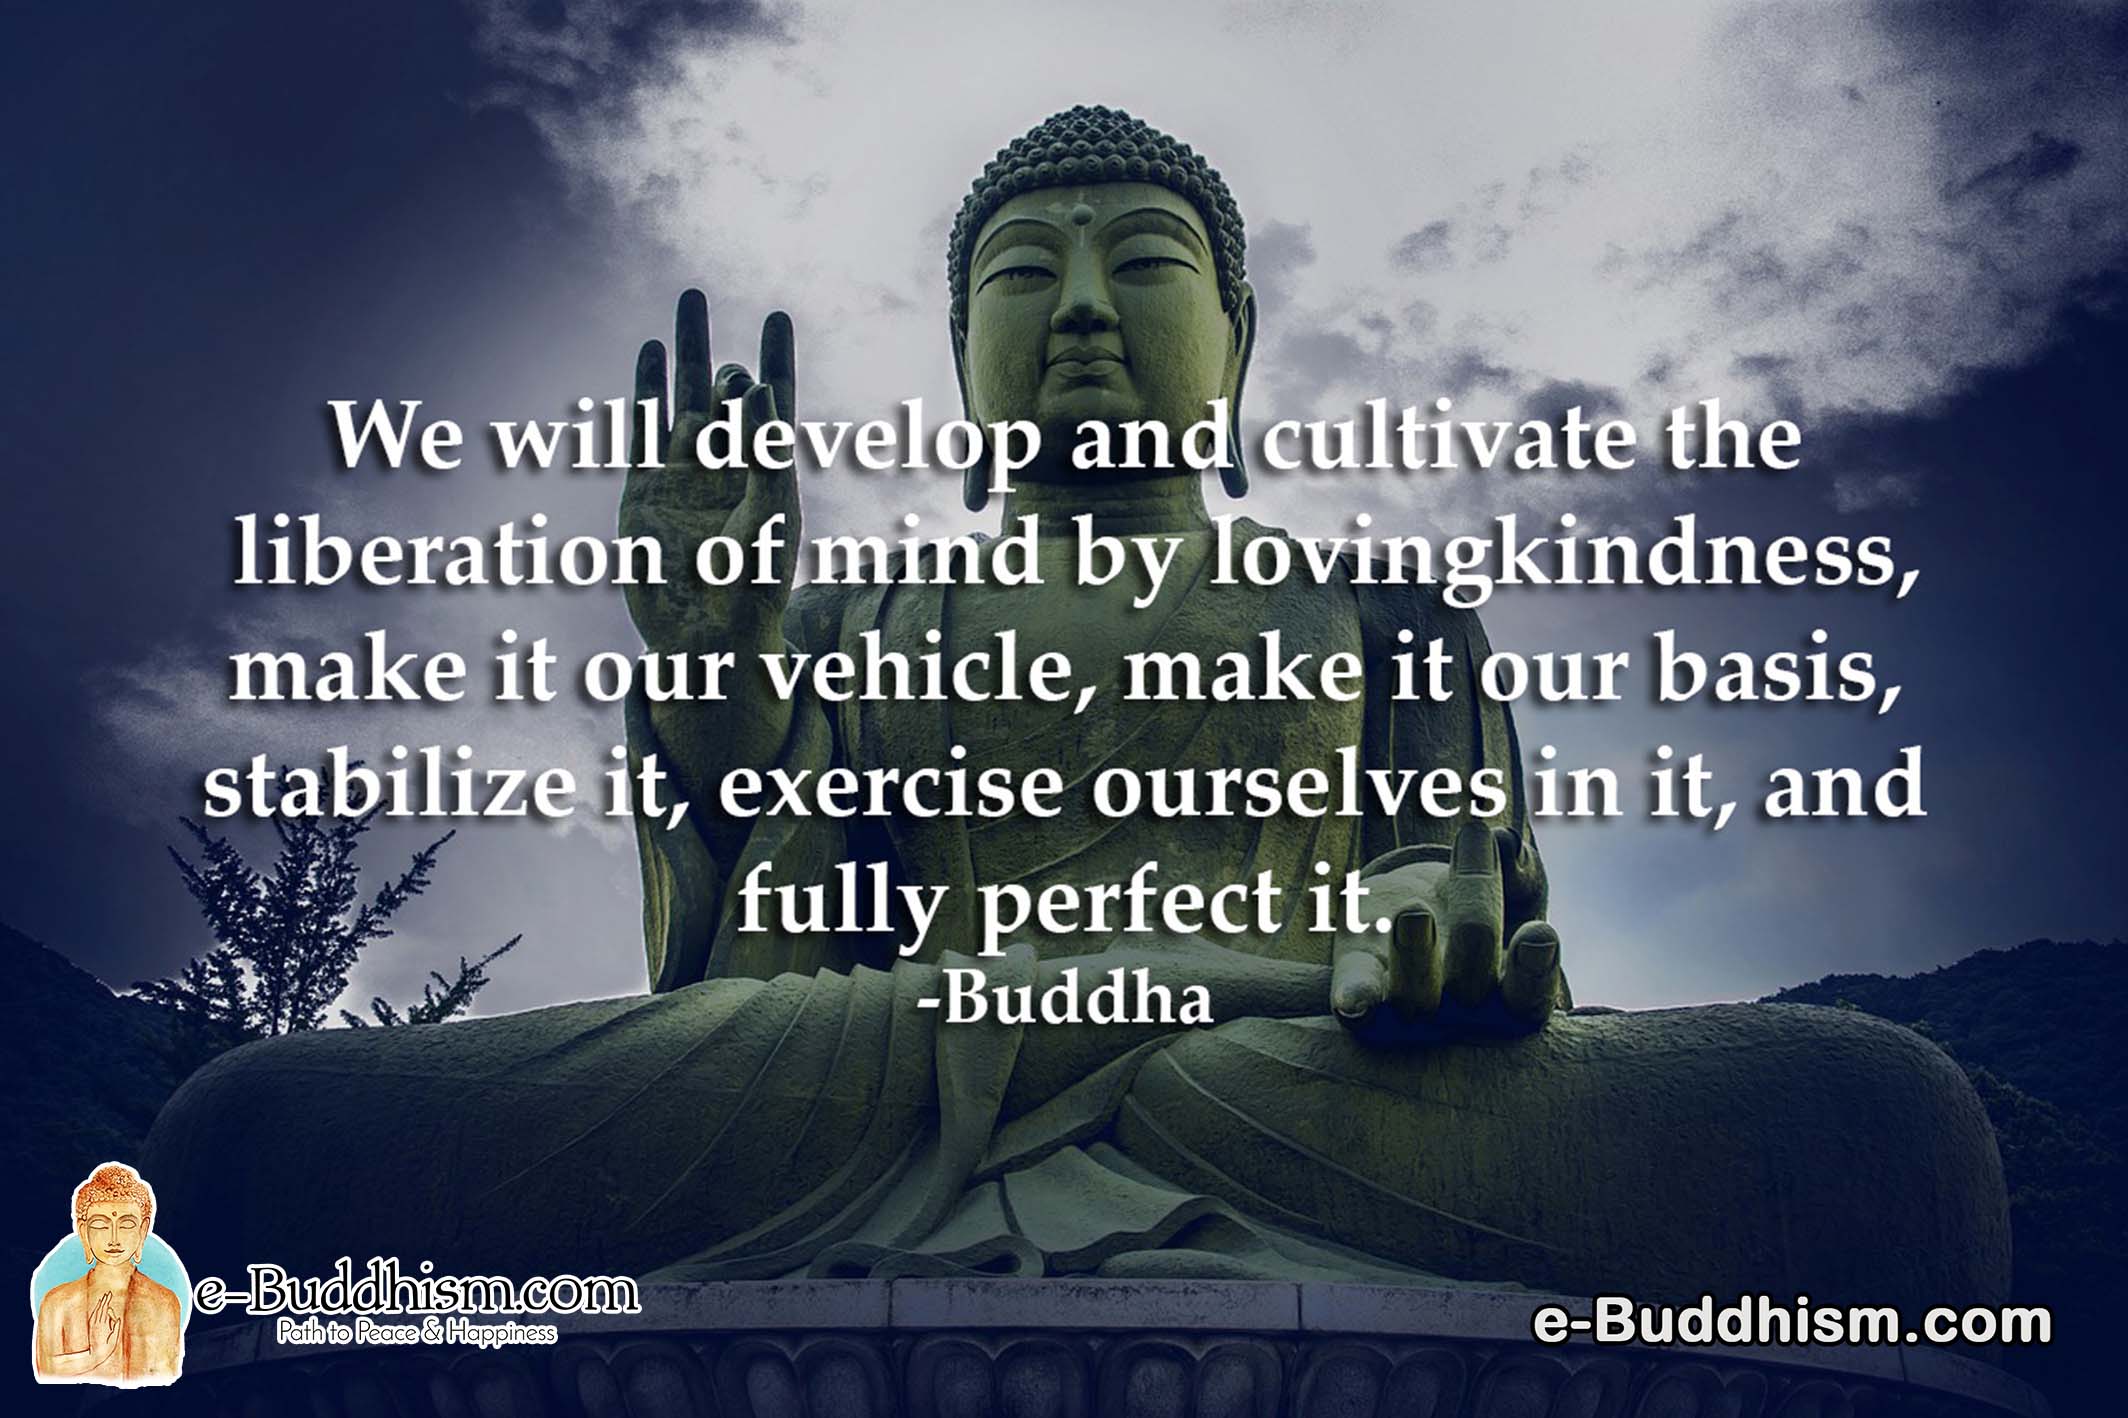 We will develop and cultivate the liberation of mind by loving-kindness, making it our vehicle, making it our basis, stabilising it, exercising ourselves in it, and fully perfecting it. -Buddha